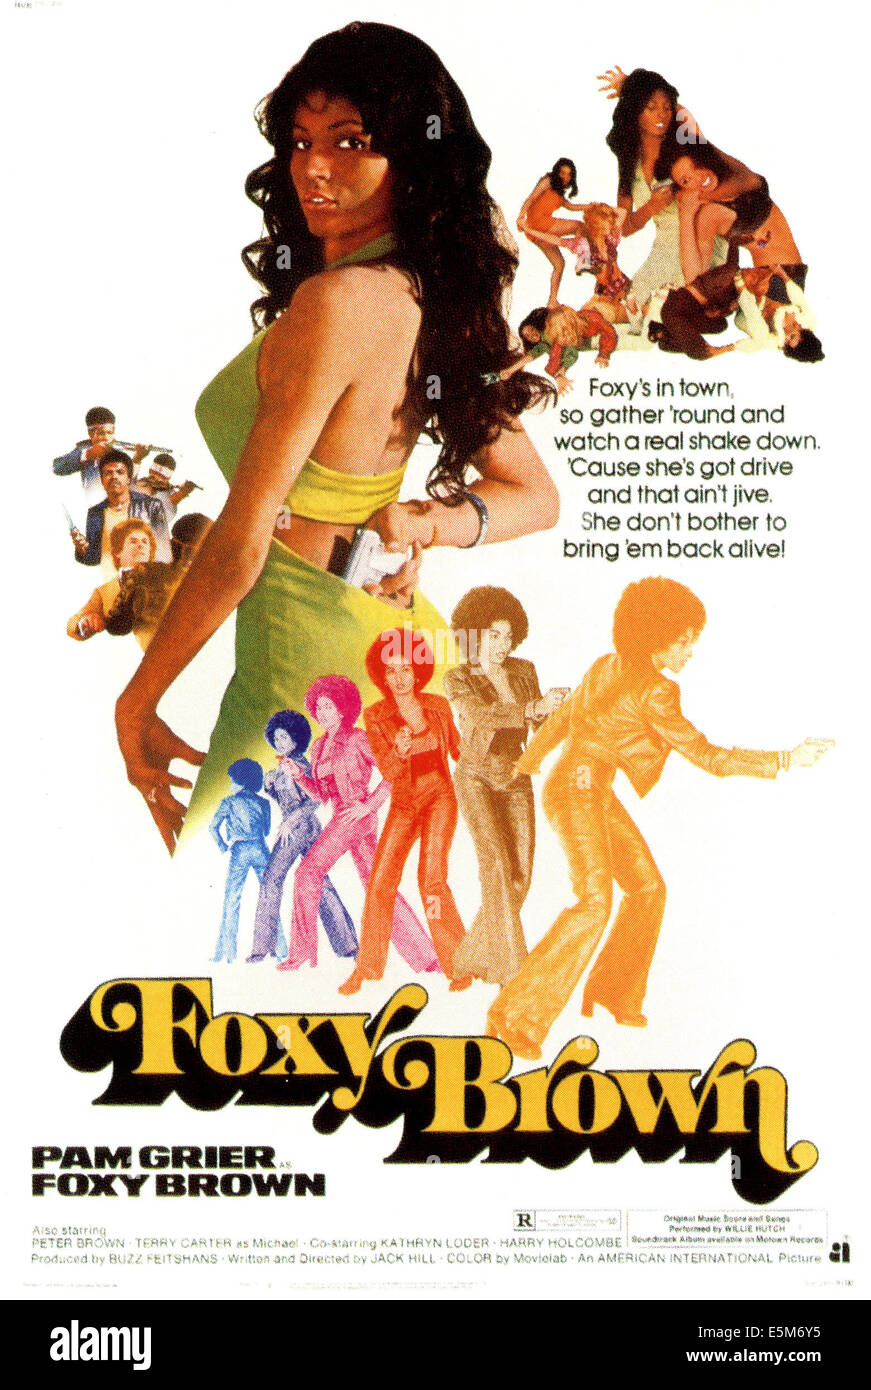 Foxy brown pam grier images